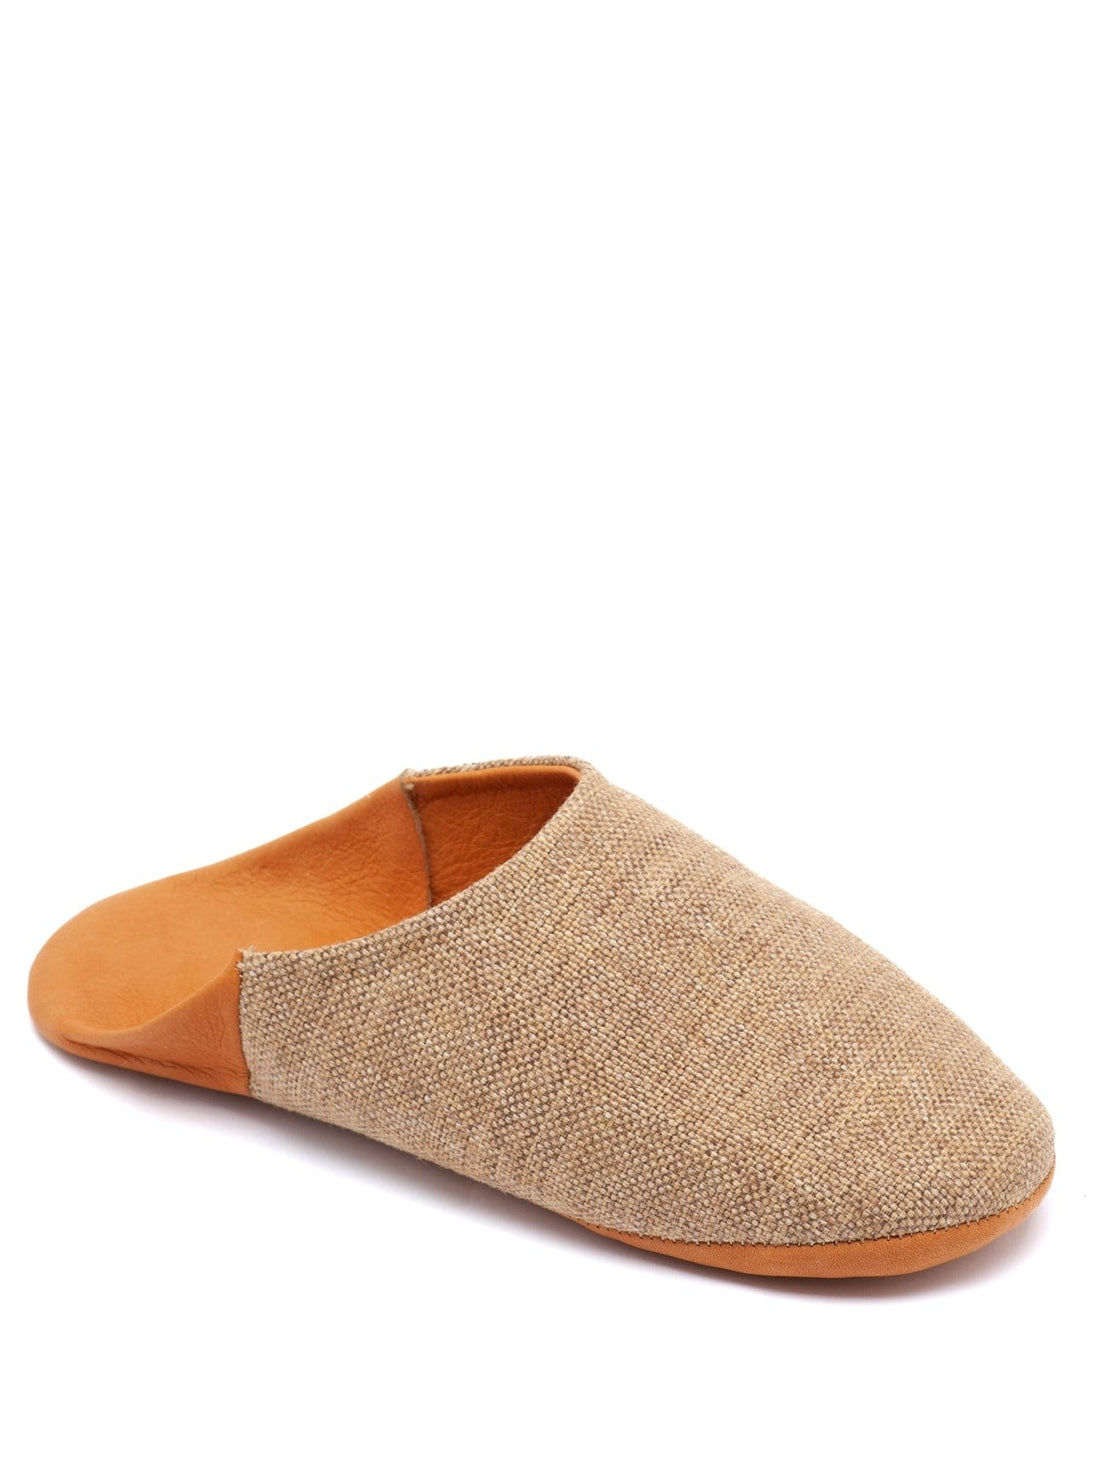 Leather &amp; Linen Slippers, Size 12.5 / 45-46